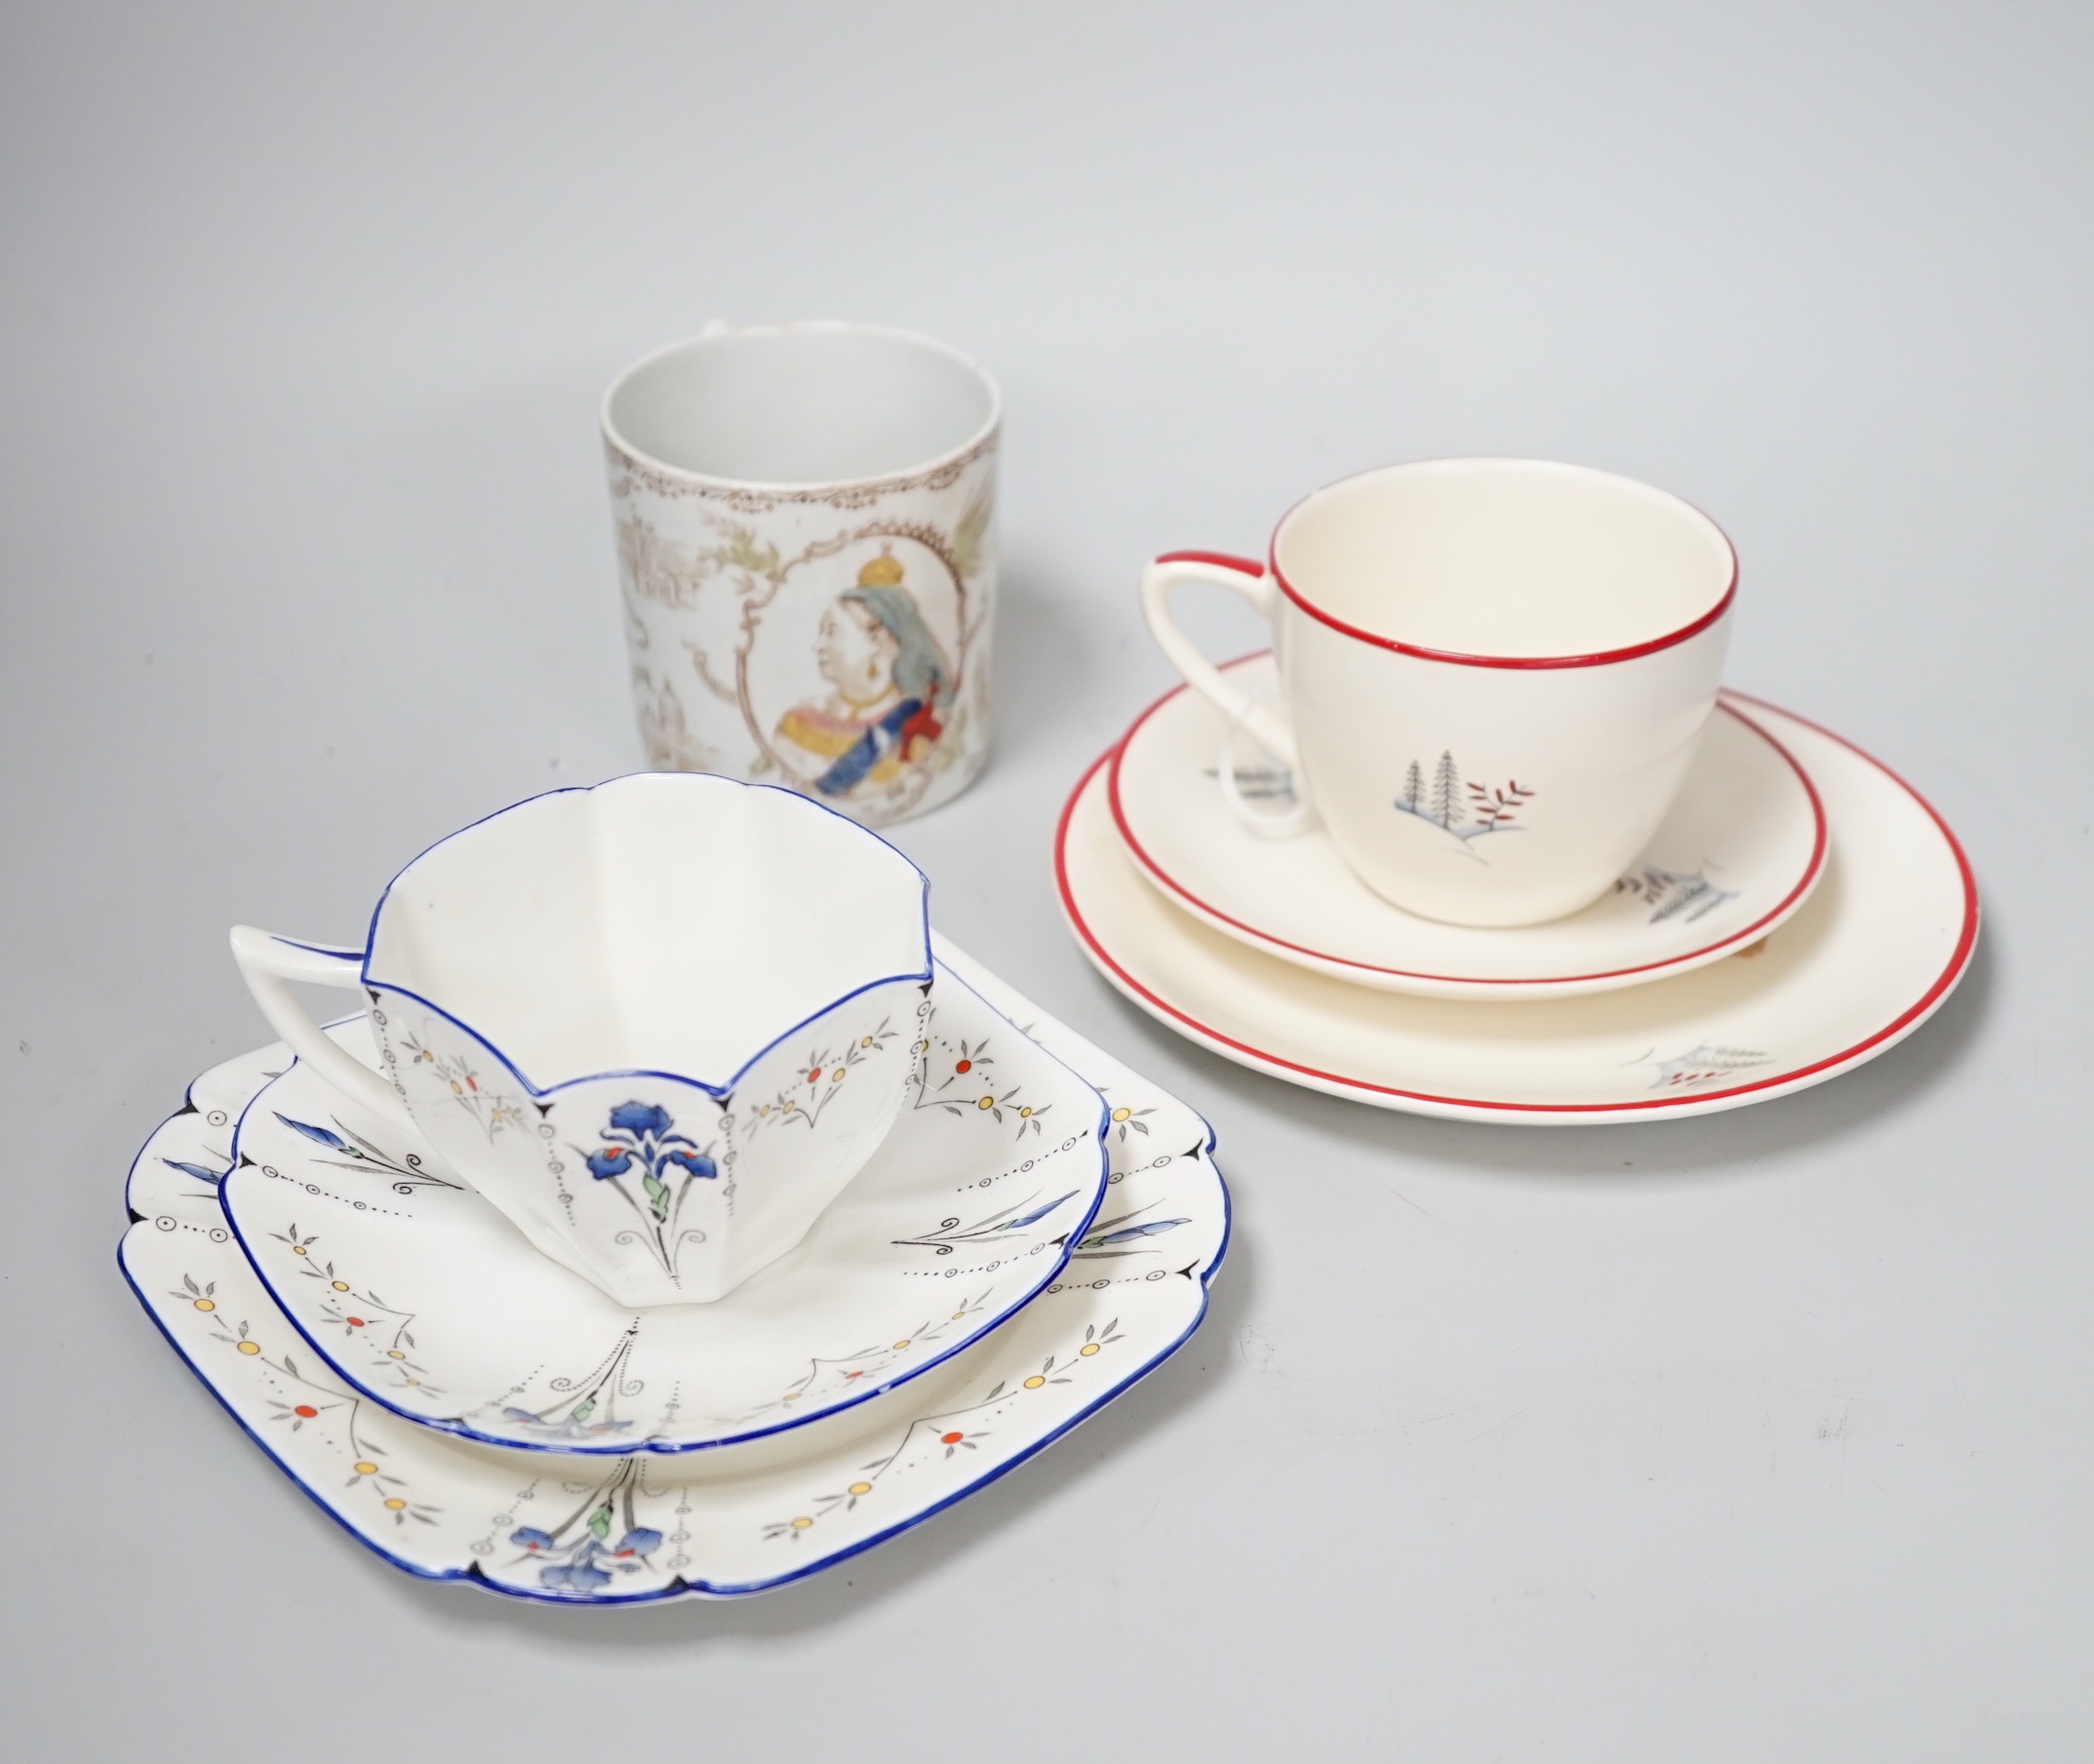 A Shelley Art Deco Blue Iris Queen Anne shape teaset and a Crown Devon cup, saucer, side plate and jug